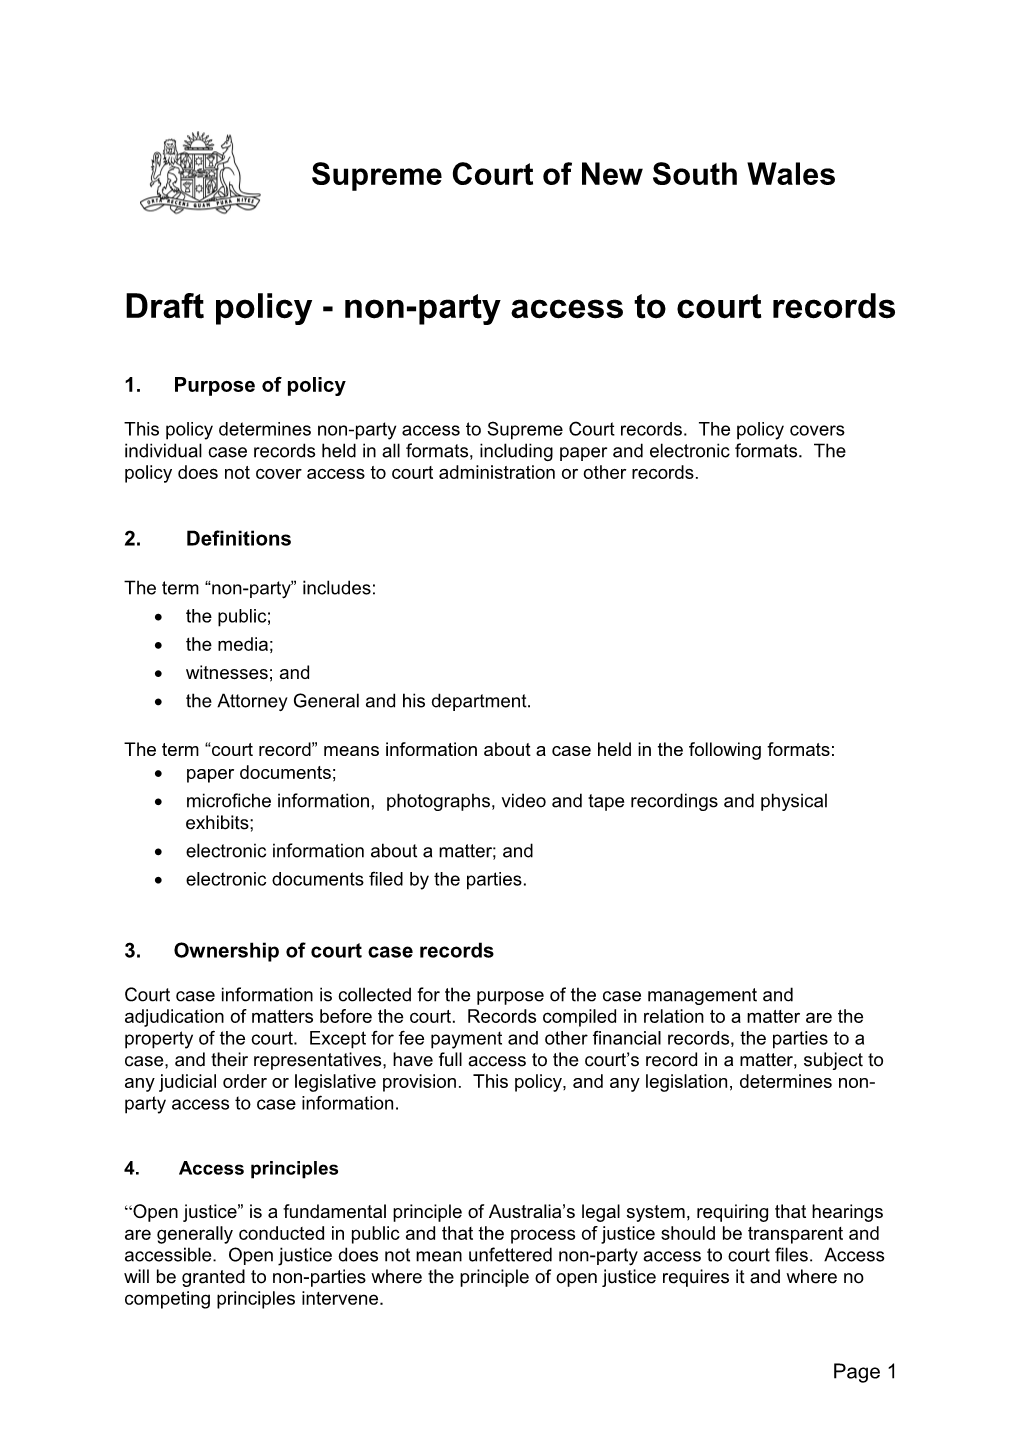 Draft Policy - Non-Party Access to Court Records